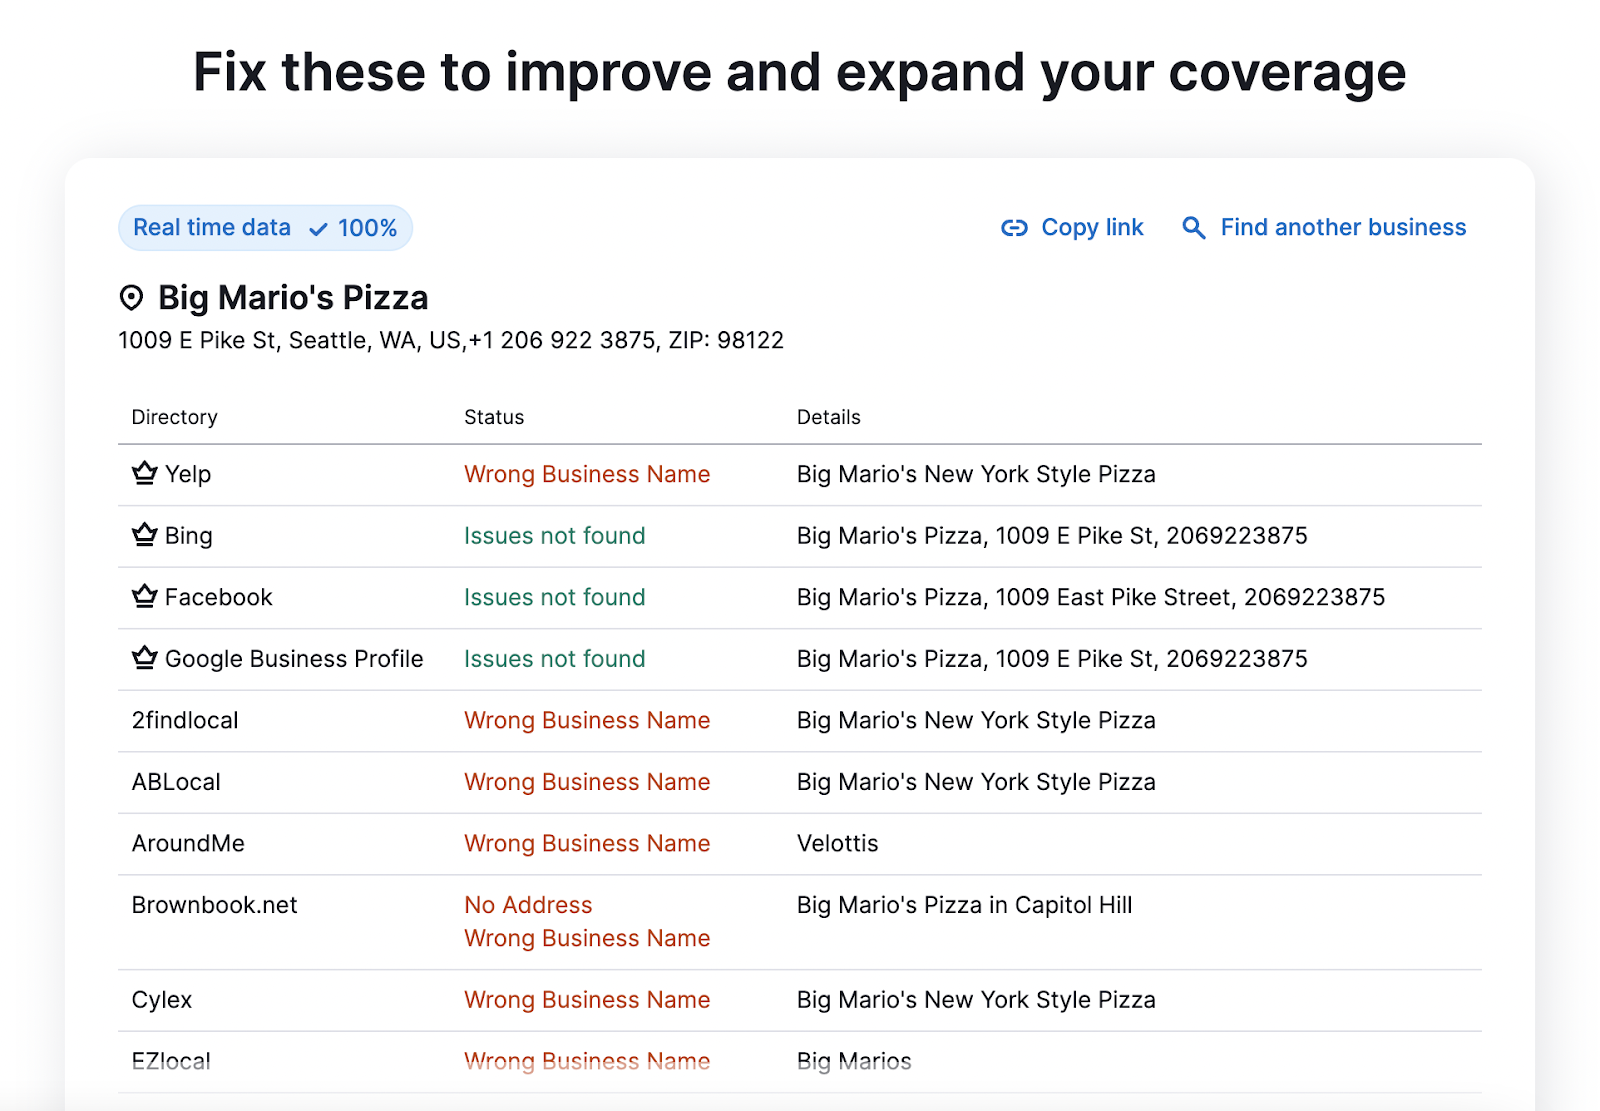 “Fix these to improve and expand your coverage” section for "Big Mario's Pizza"